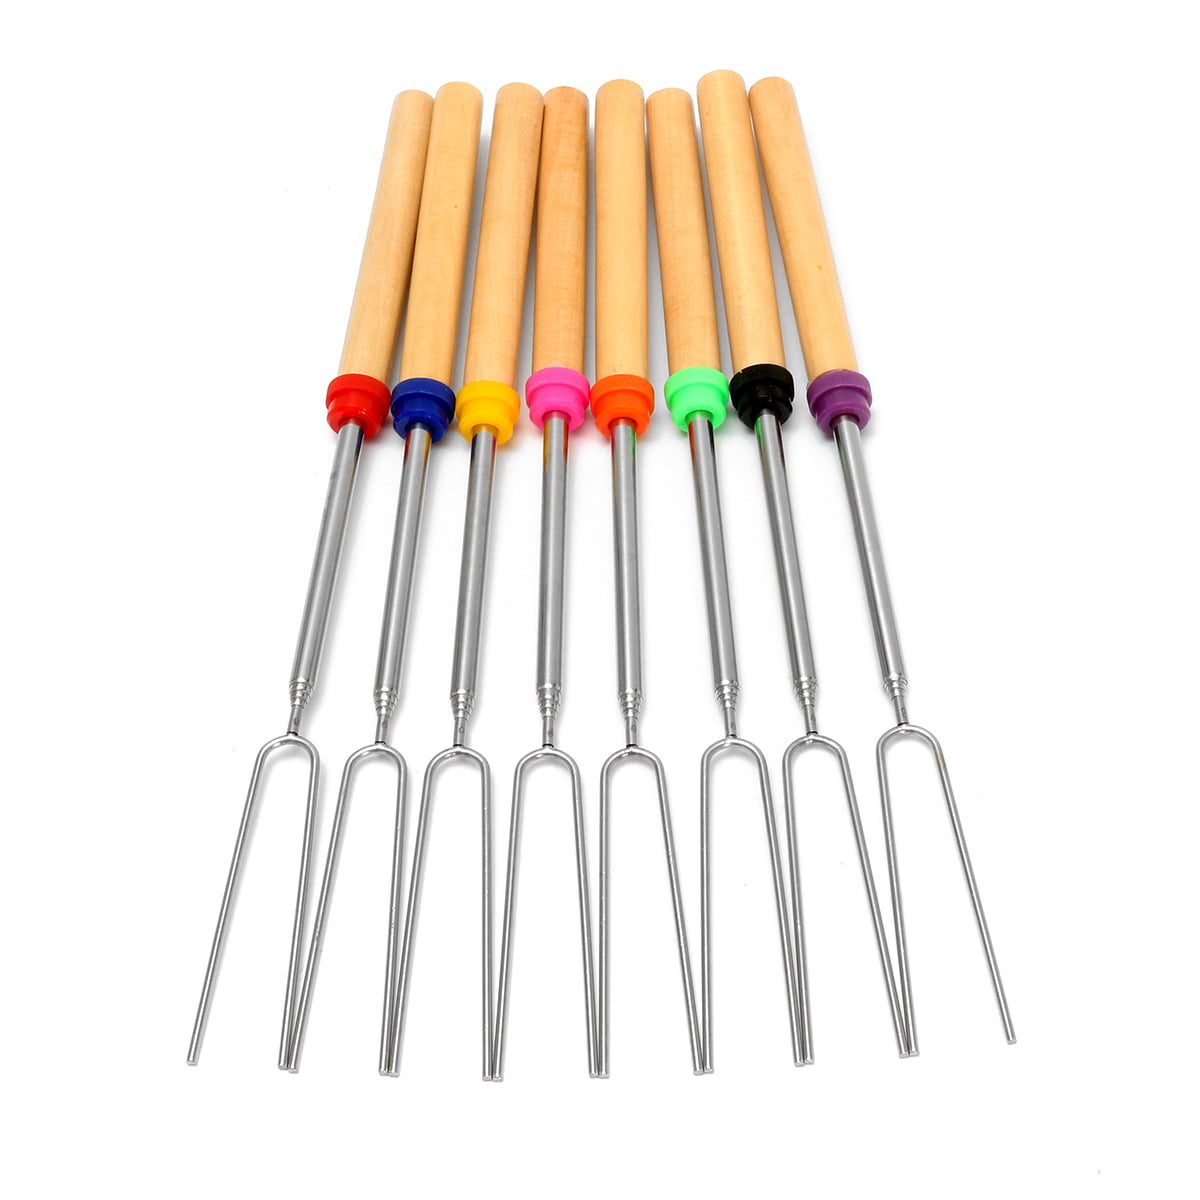 Metal Craft Barbecue Skewers Stick for Campfire,Bonfire,Grill,Camping 6 Pcs Extendable Marshmallow Roasting Sticks 32 Inch Telescopic Retractable Stainless Steel BBQ Forks With Wooden Handle 